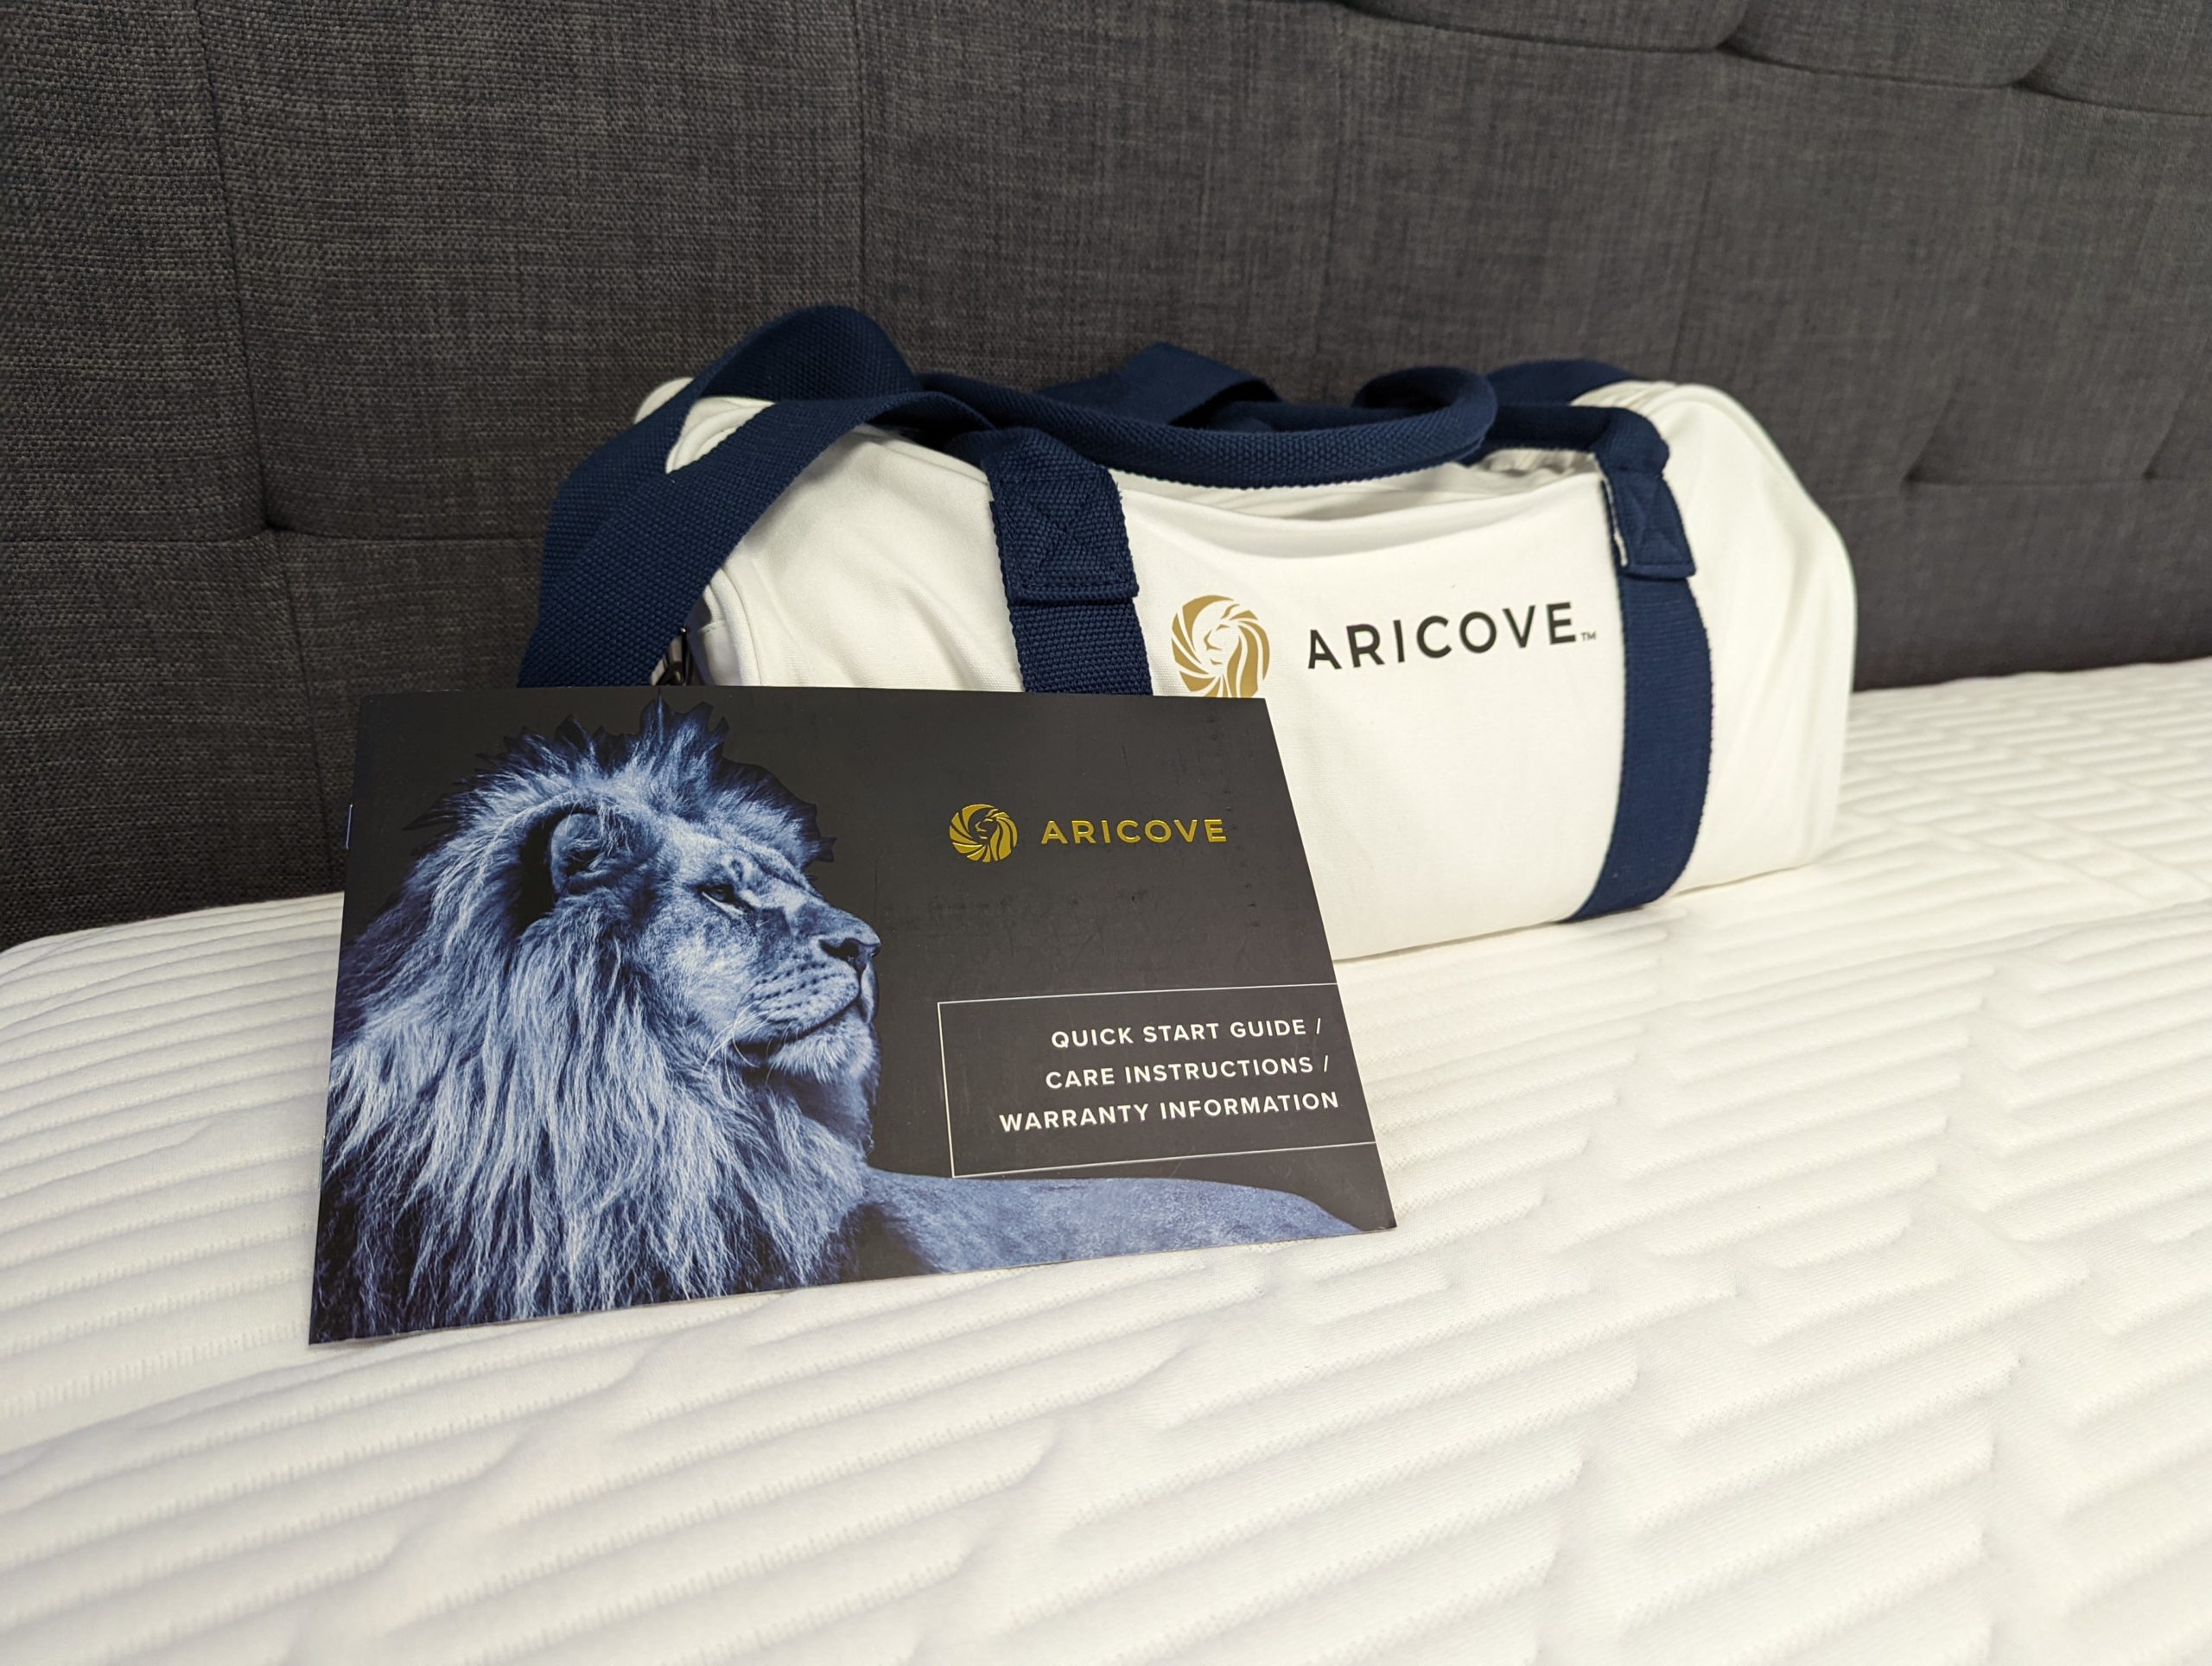 Aricove Weighted Blanket Review